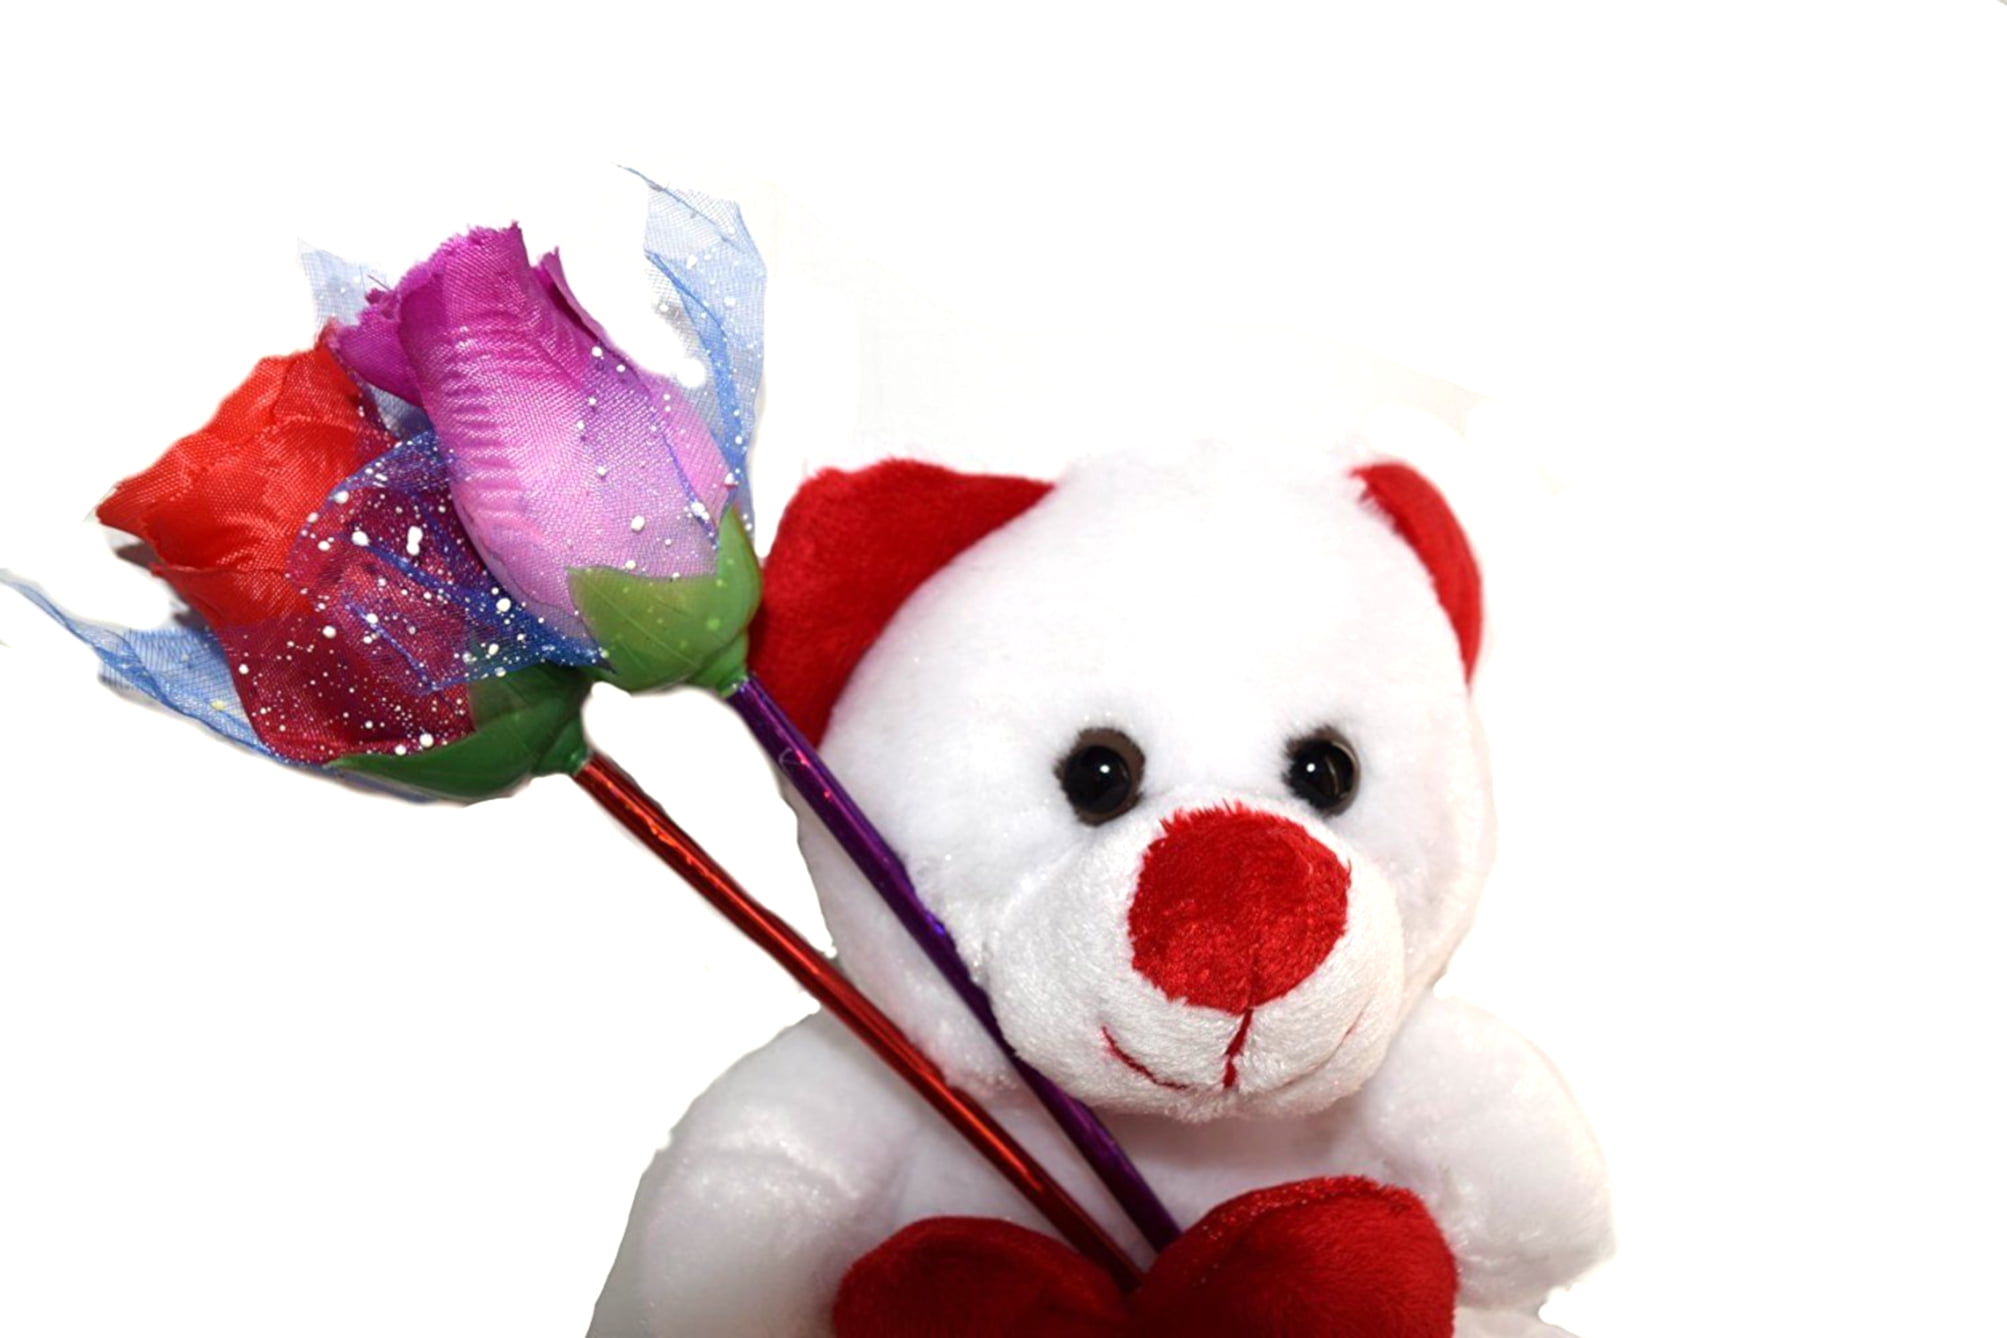 I Love You Plush Red White Plush Teddy Bear 14.5 Inches Two Rose Ink Pens 333 